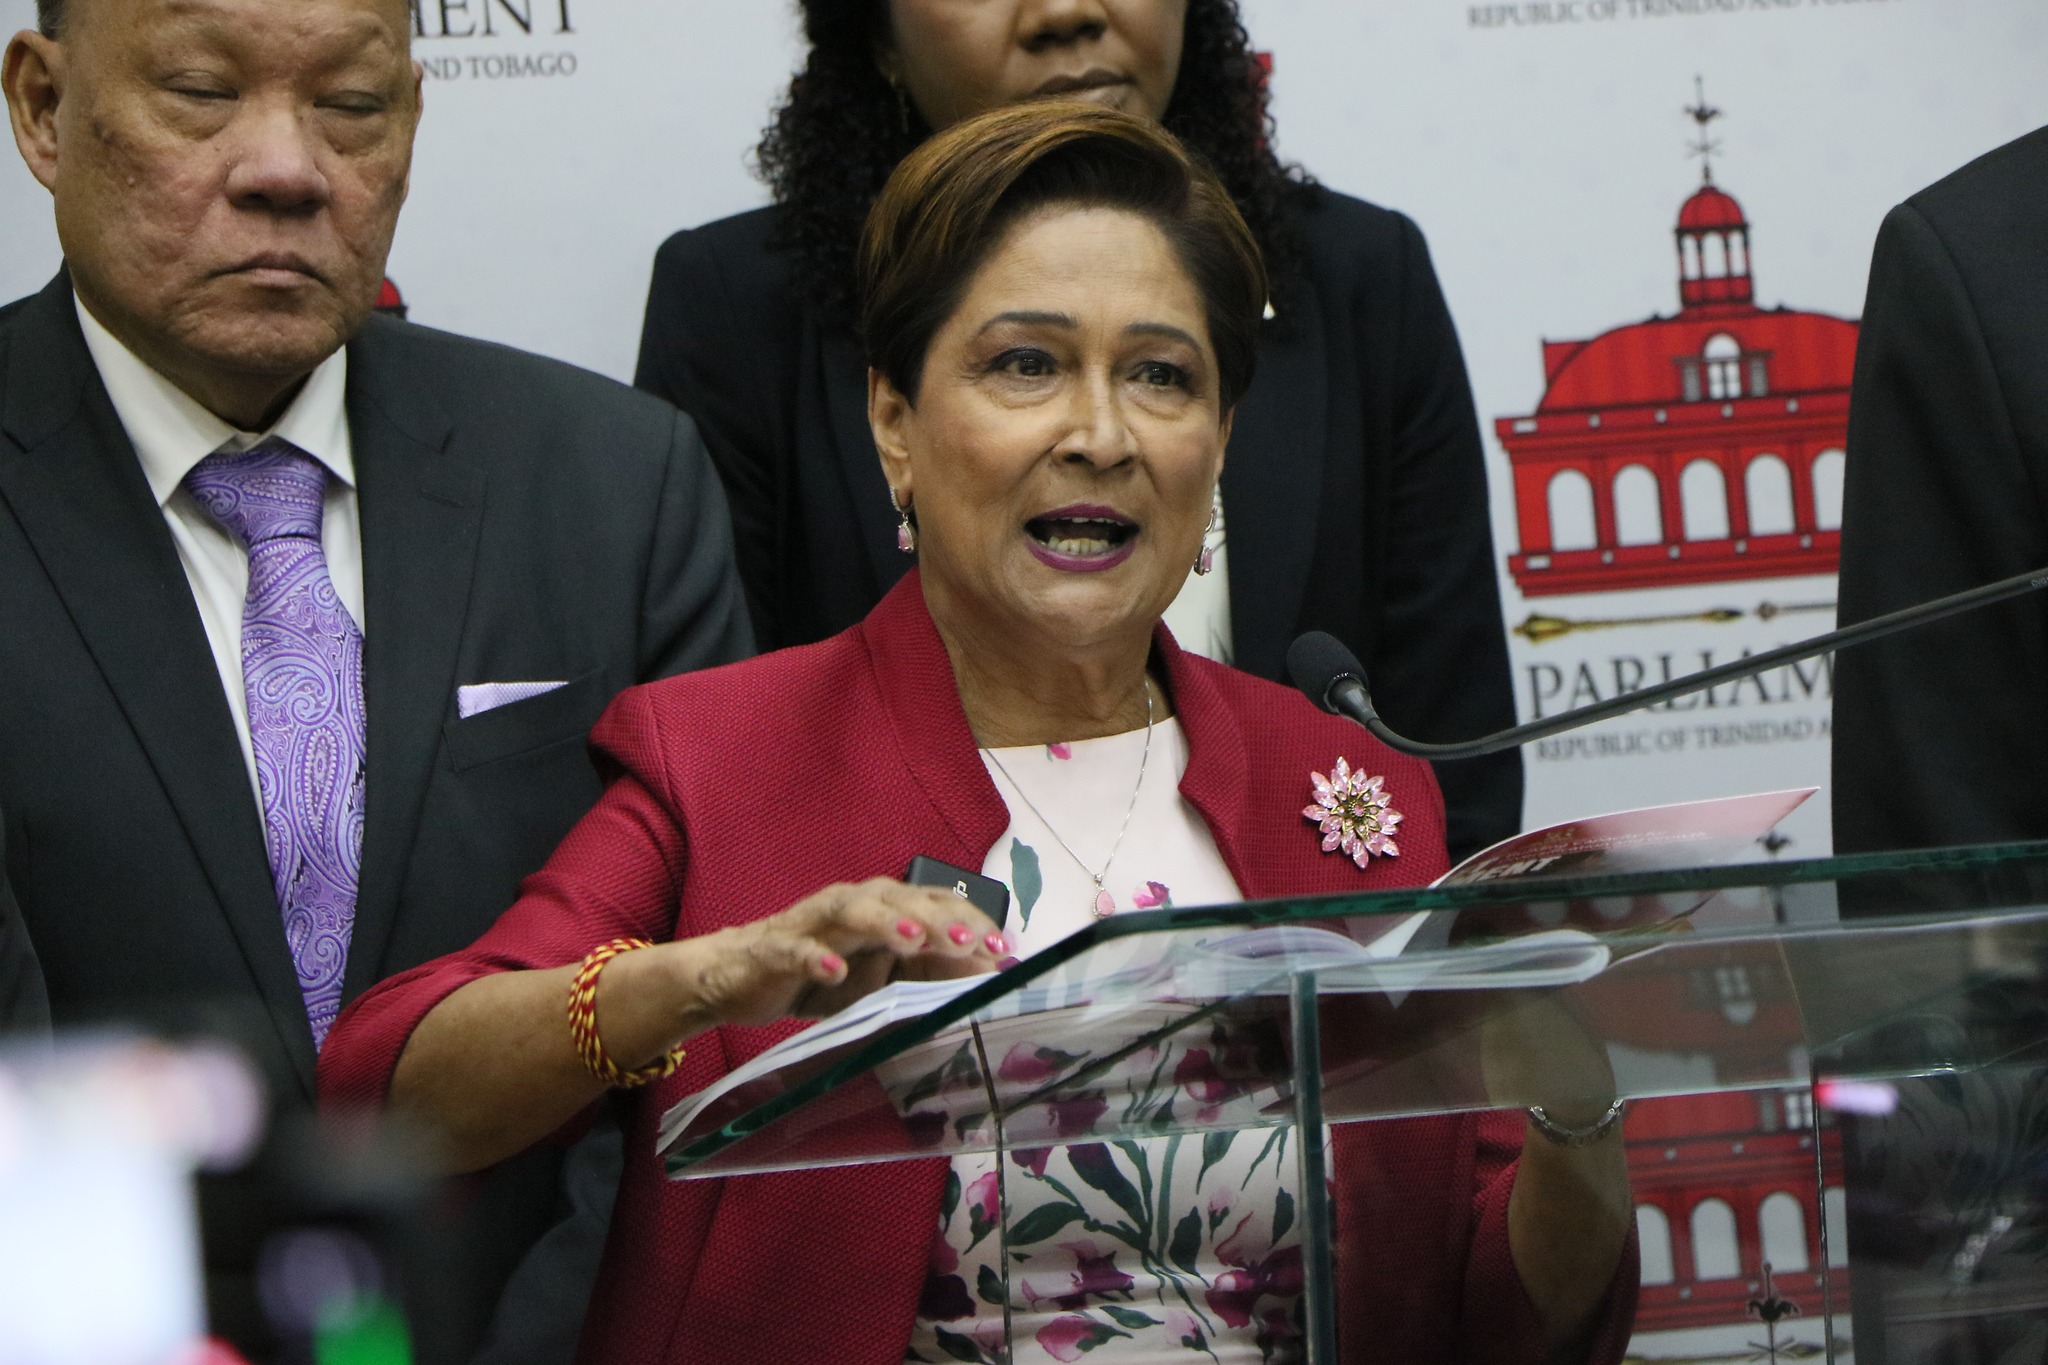 Kamla: Rowley must instruct Paria to accept liability for negligence